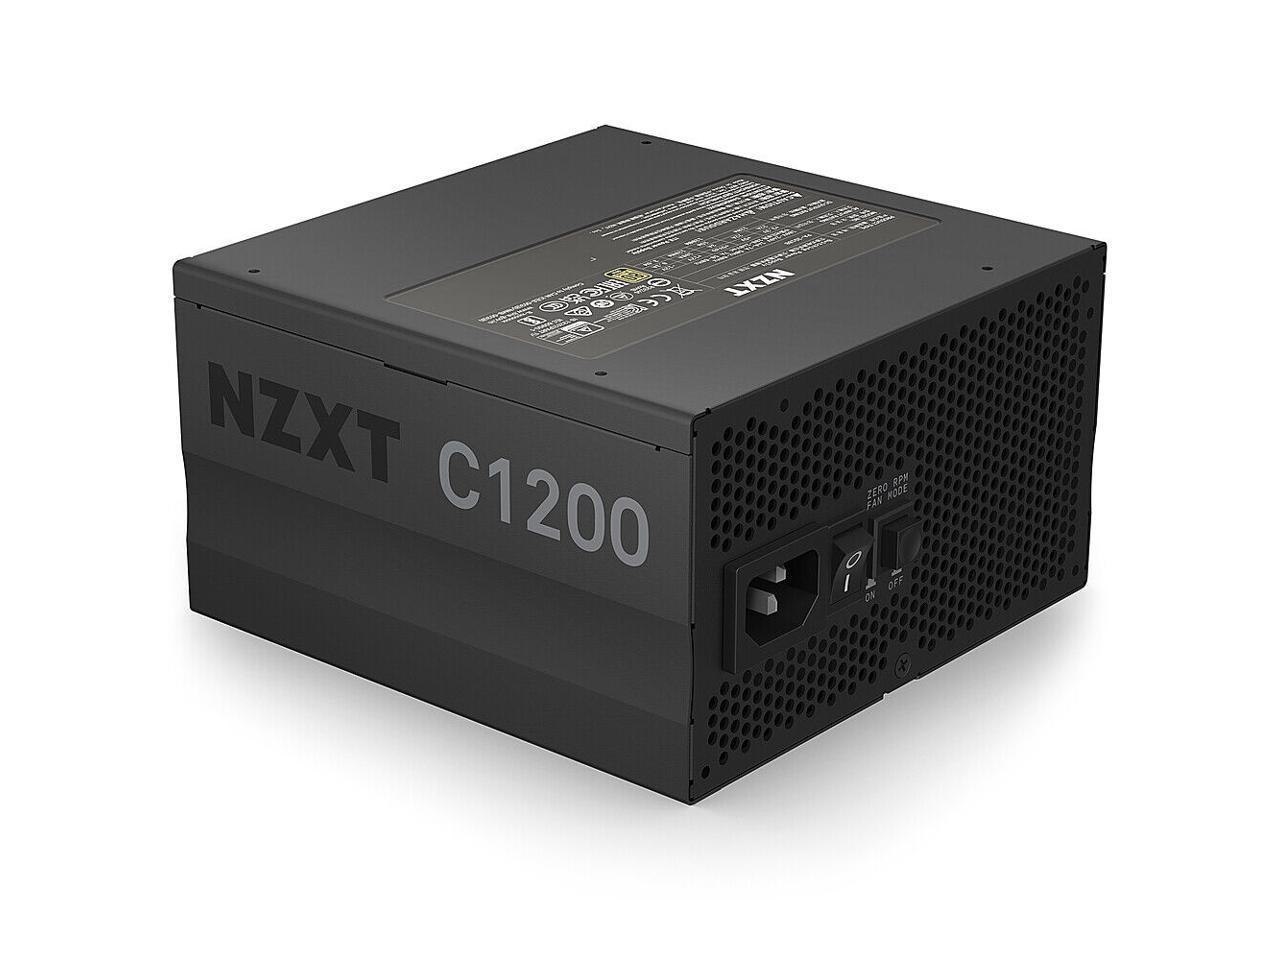 NZXT C Series C1200 Gold 1200 W Full Modular 80 Plus Gold Atx (Atx 3.0 Compatible) / Eps12v Power Supply - Pa-2G1bb-Us